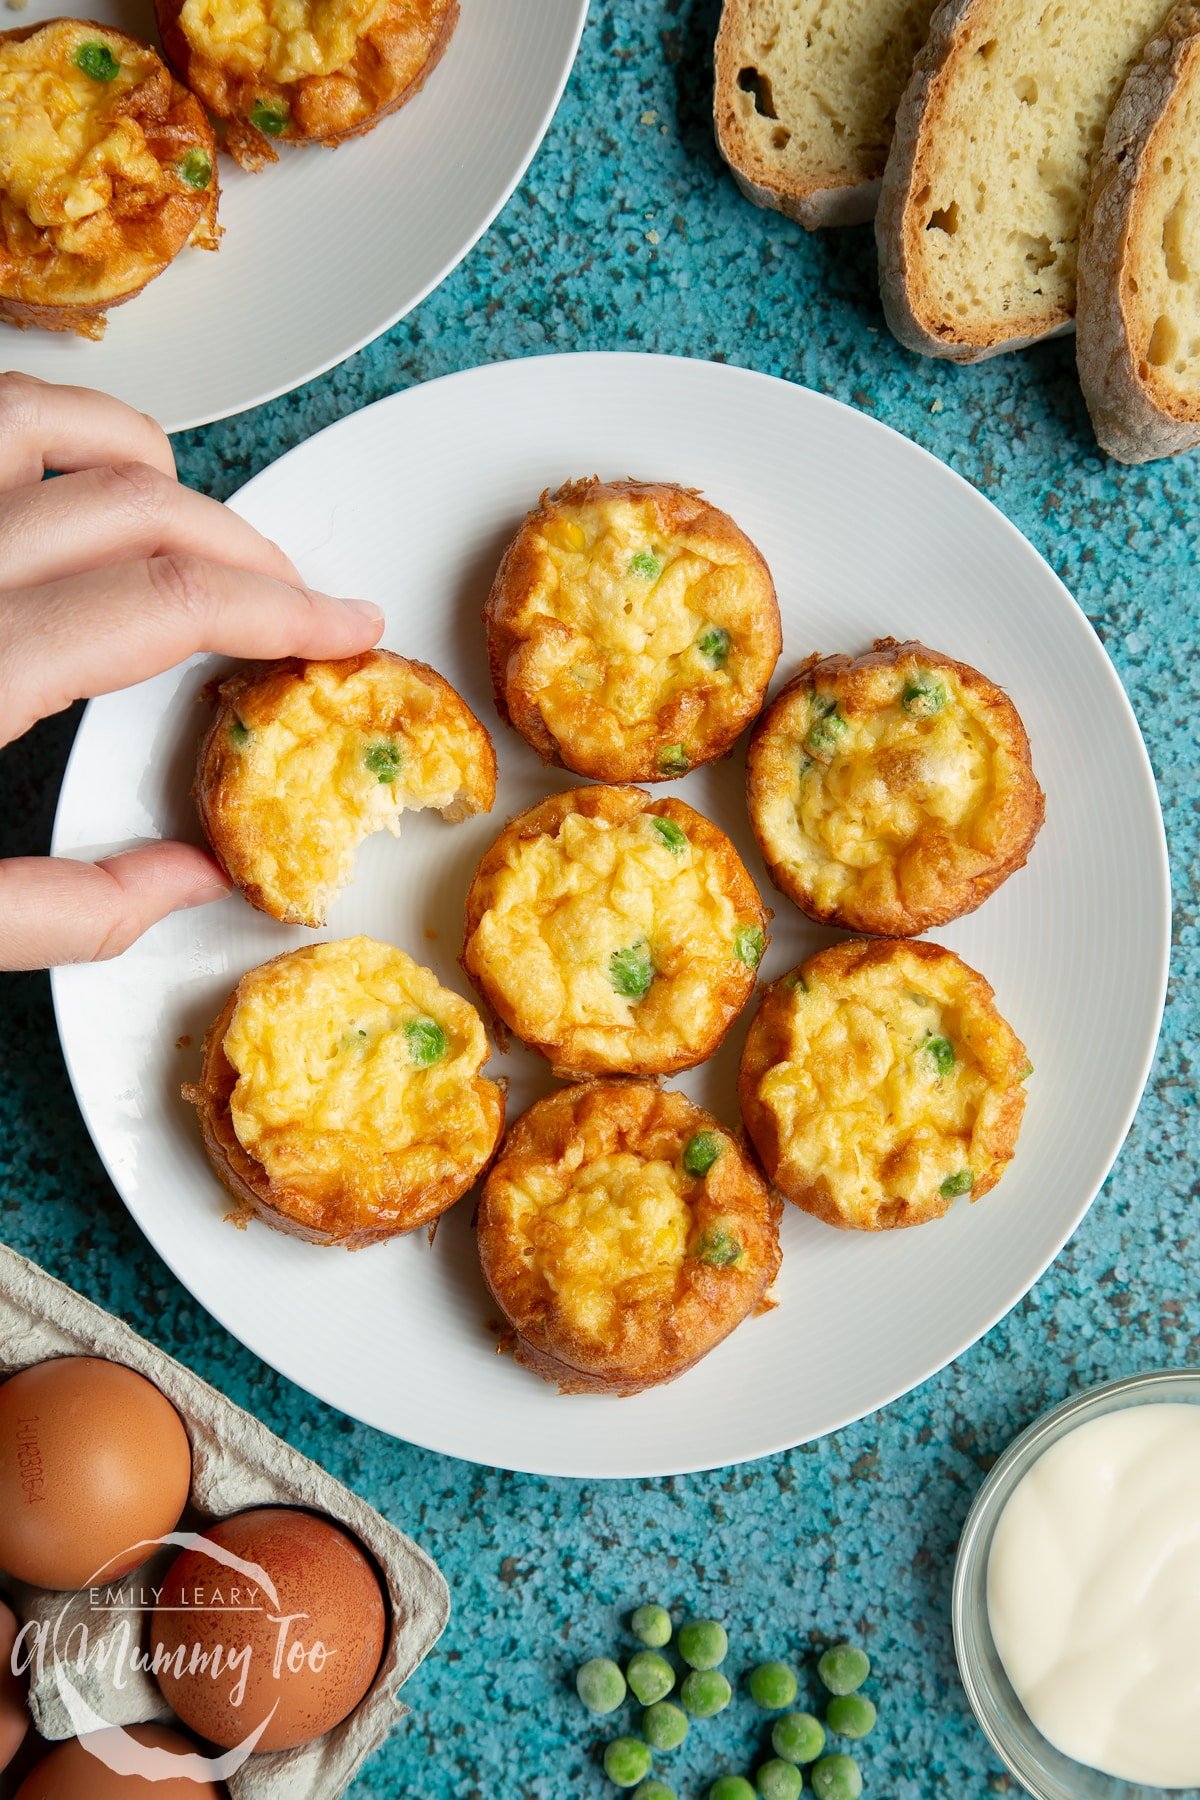 Mini vegetable frittatas arranged on a white plate. Slices of bread and ingredients surround the plate. A hand reaches in to take a frittata, which has a bite taken out of it.